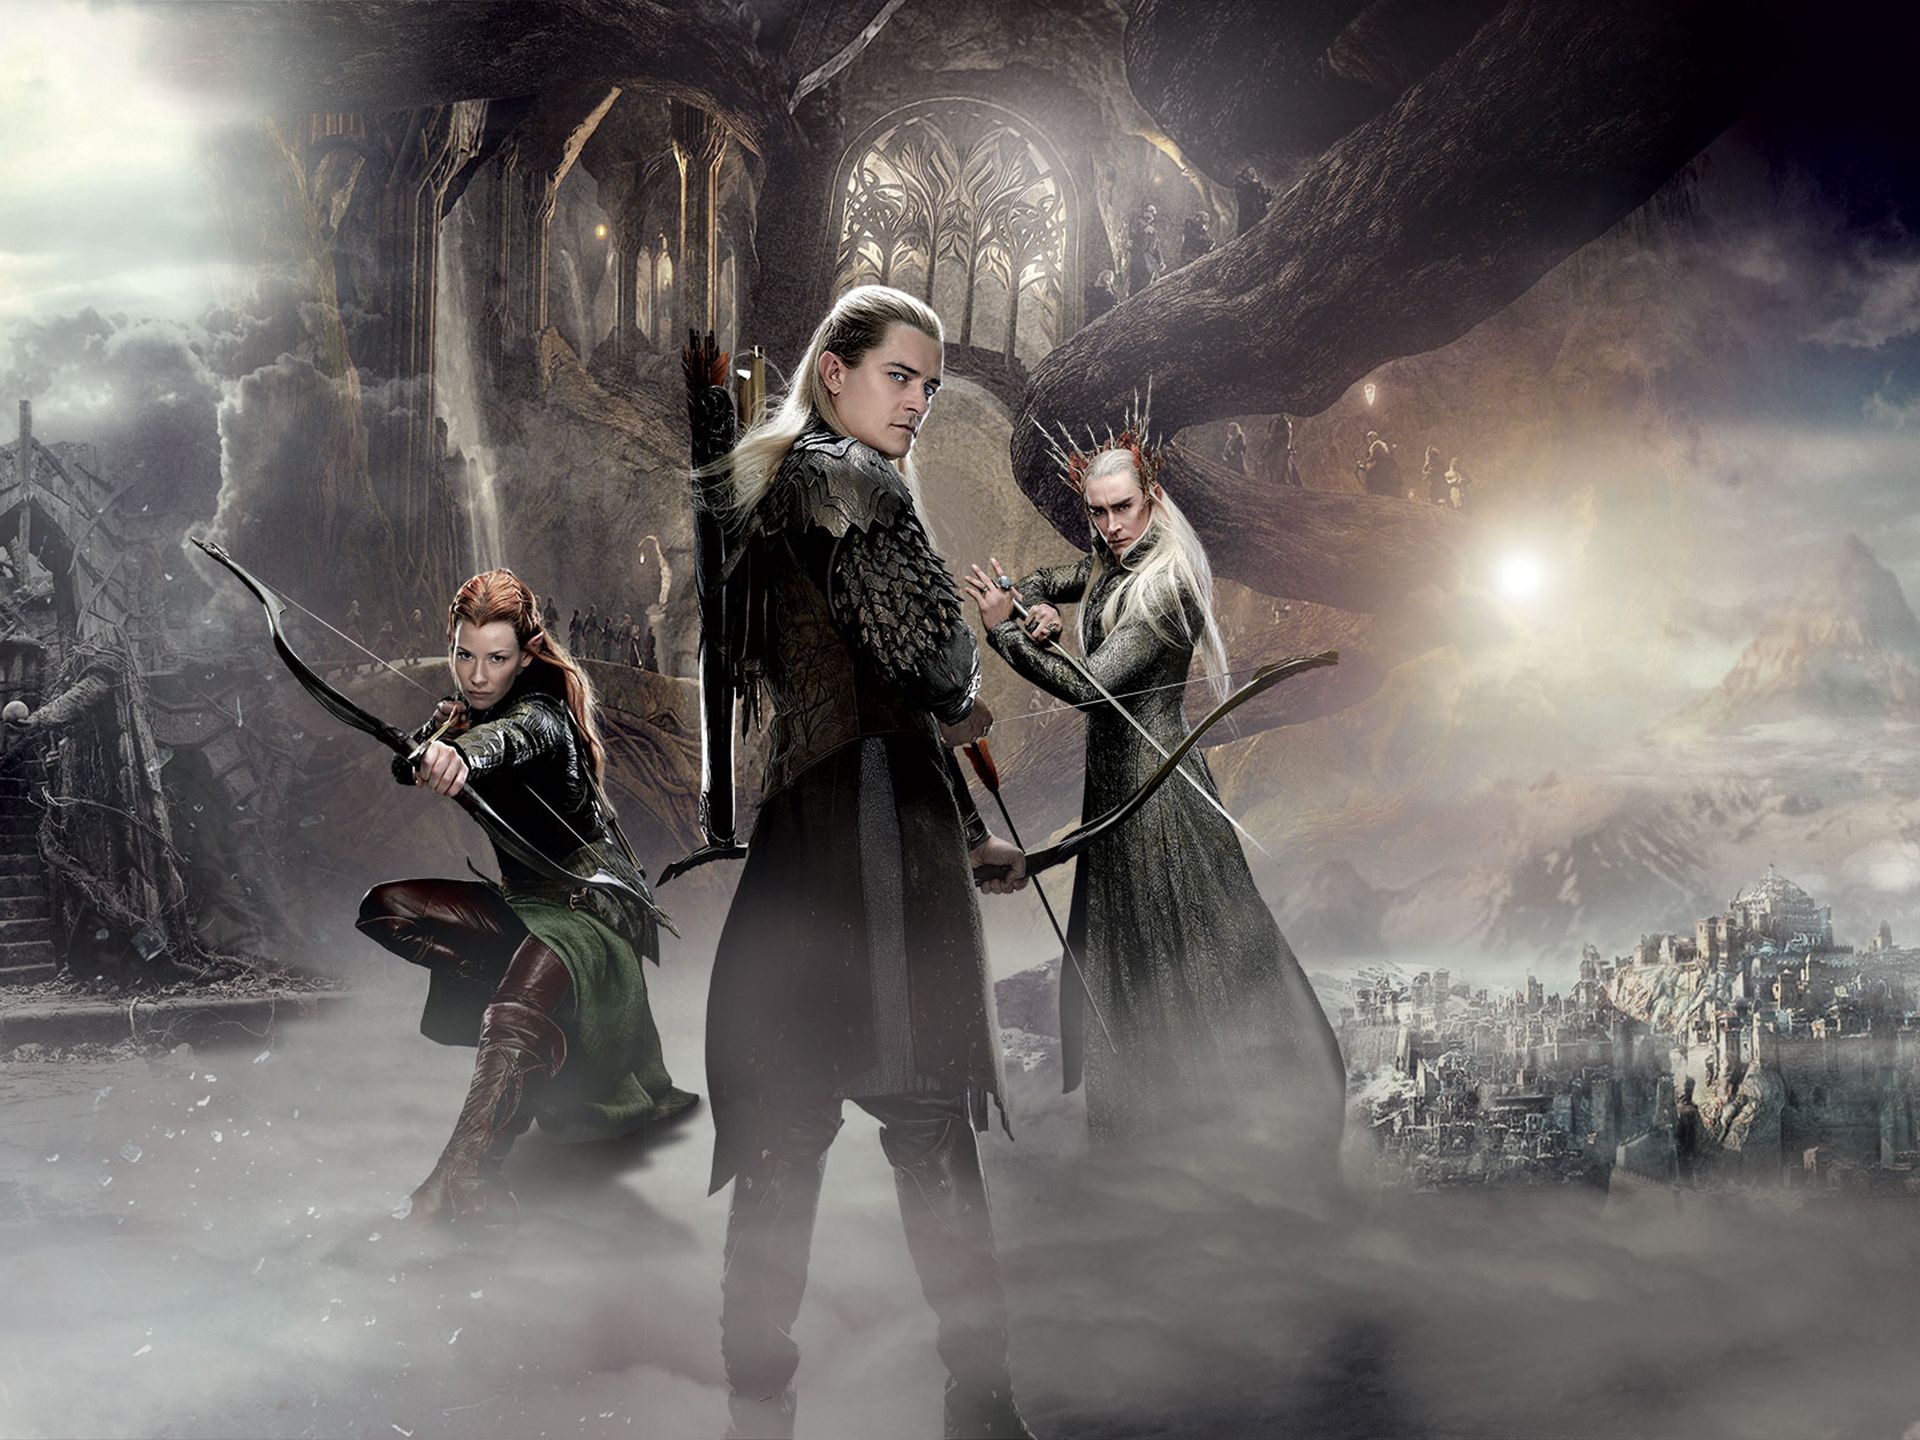 The Hobbit Desolation Of Smaug Wallpaper In